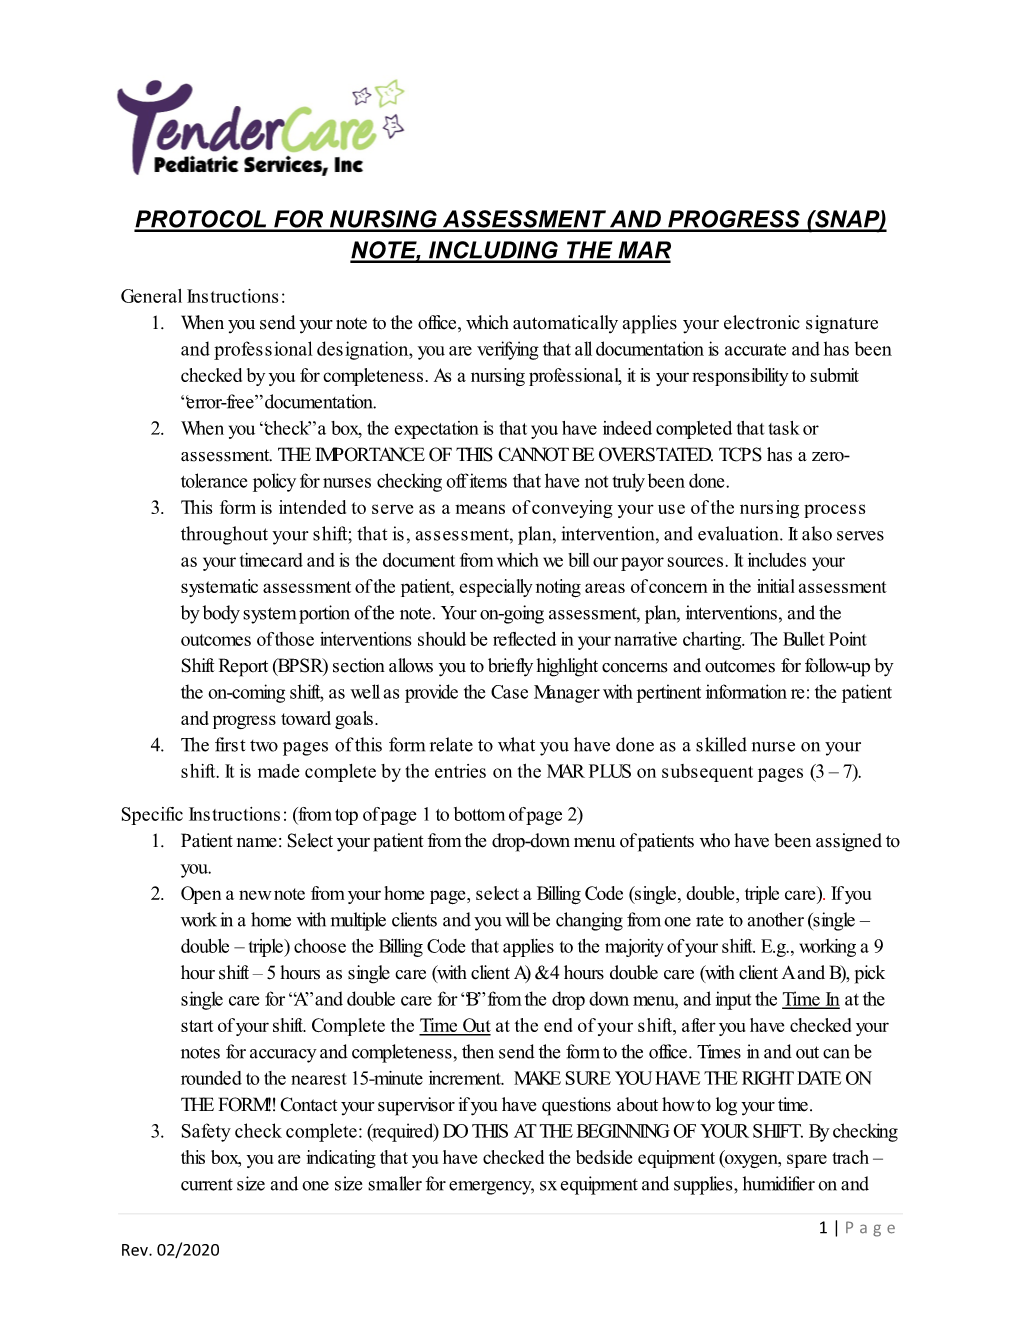 Protocol for Nursing Assessment and Progress (Snap) Note, Including the Mar